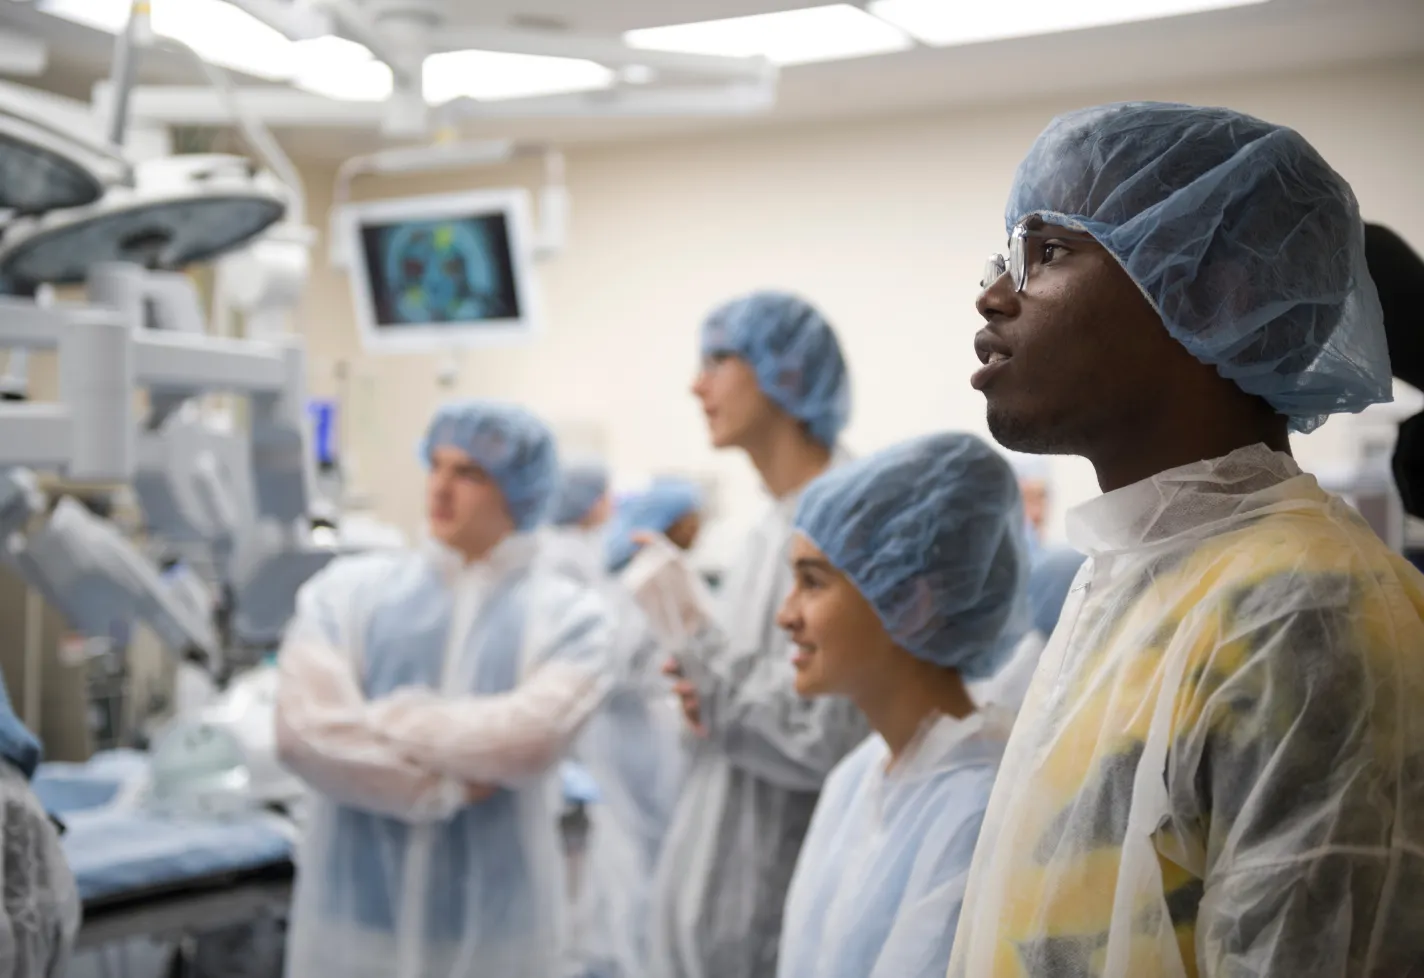 A group of students are wearing personal protective equipment (PPE) as they stand and observe in an operating room.  